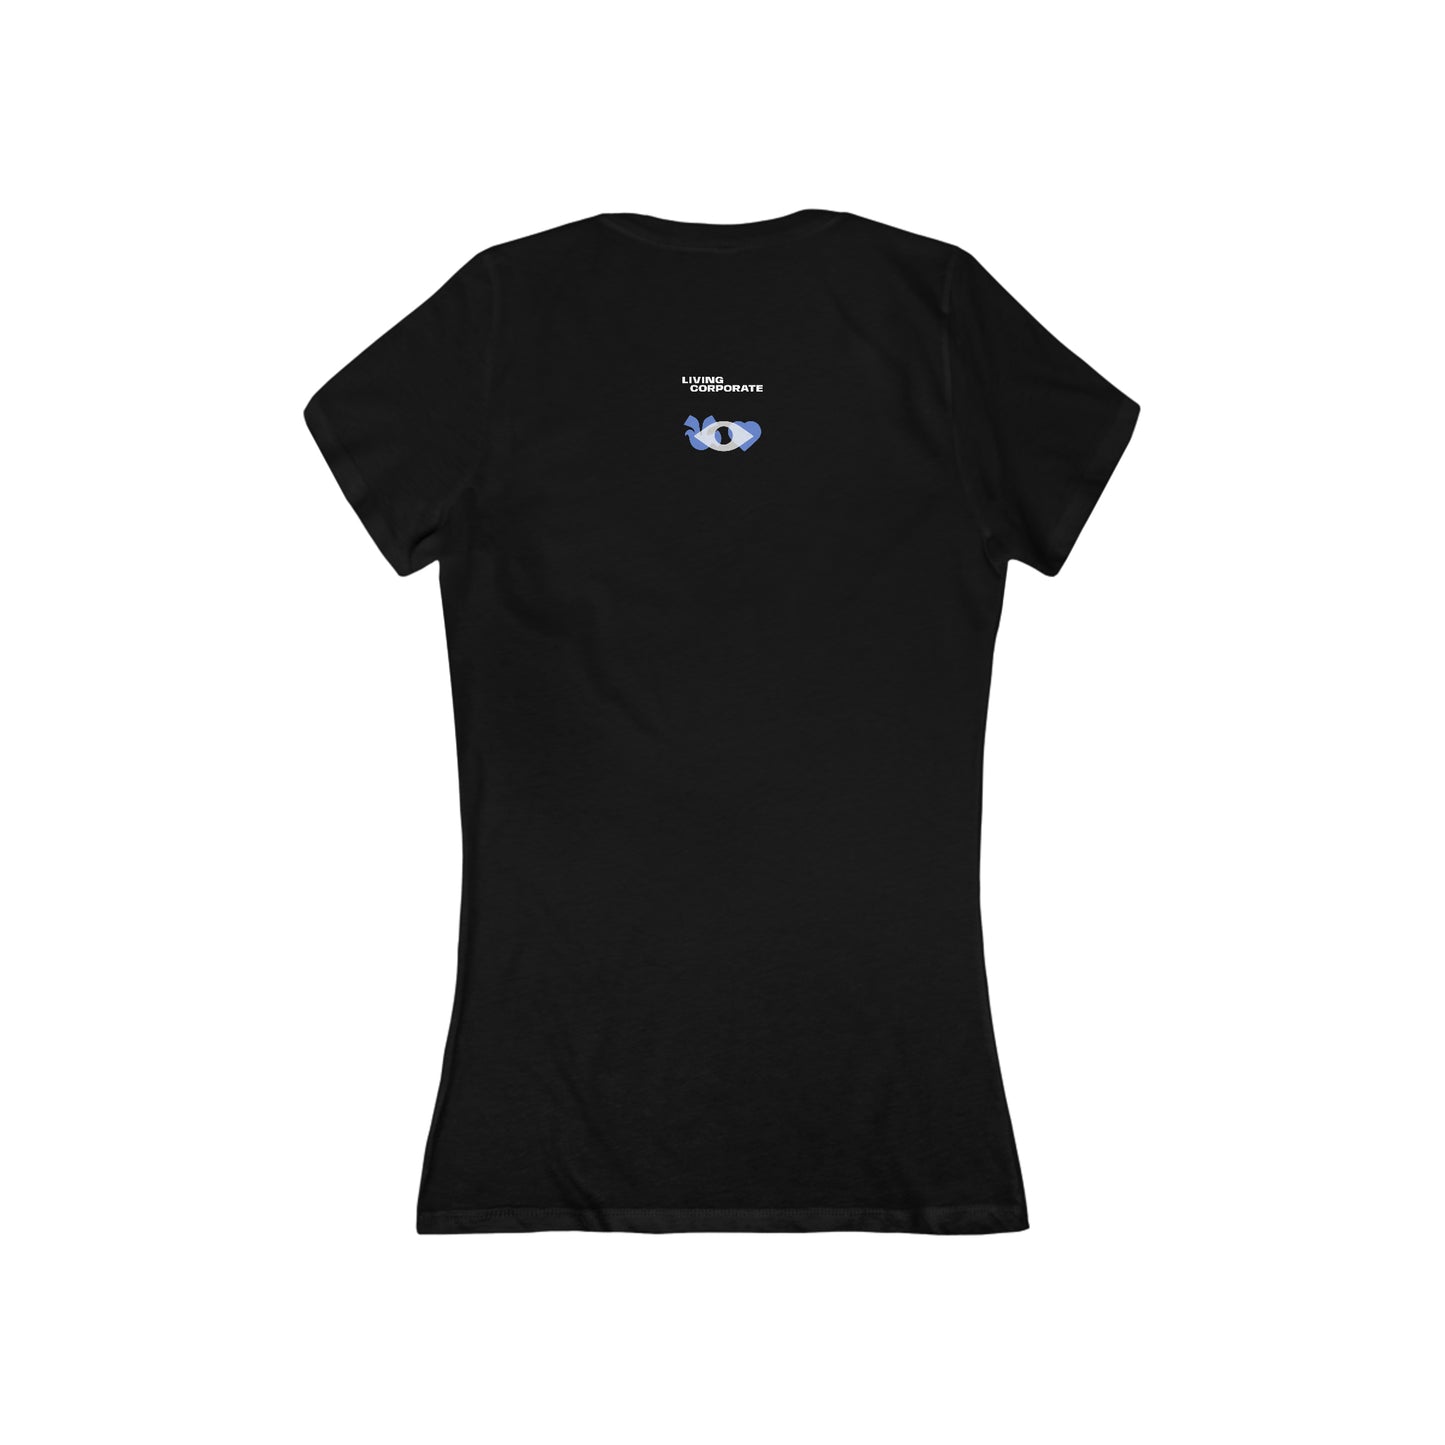 Seen and Known | Women's V-Neck Tee